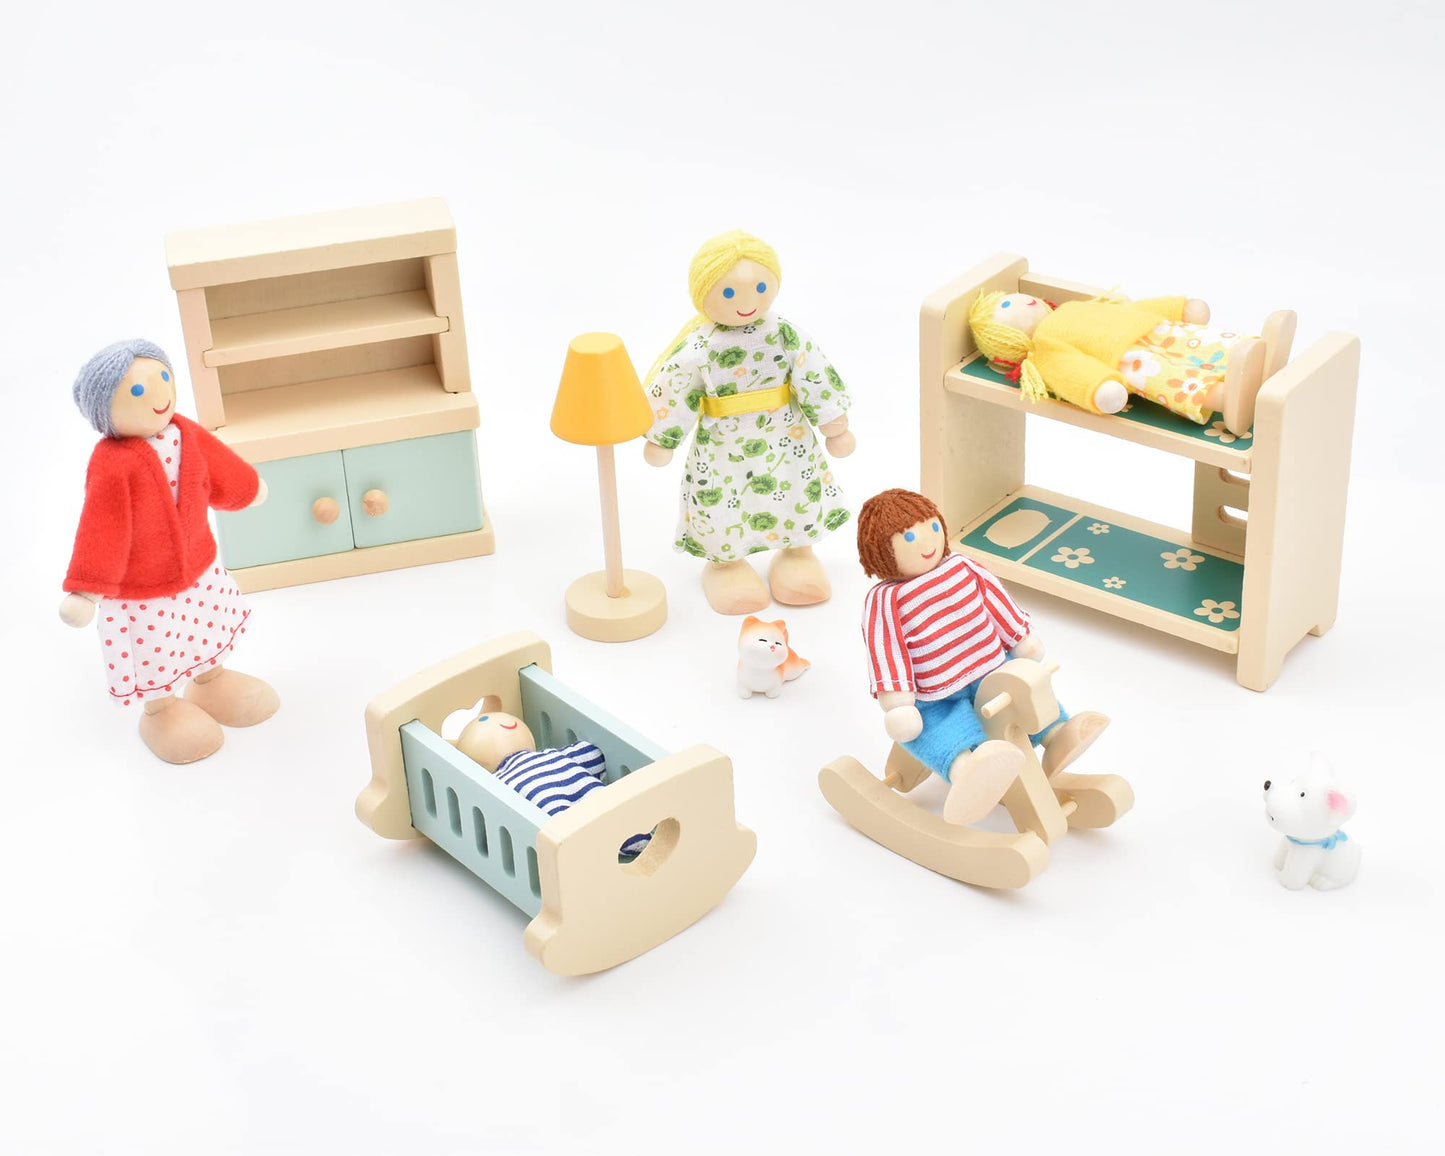 Jzszera Wooden Doll House People of 8 Miniature Figures and 2 Pets, Dollhouse Dolls Family Set- Dollhouse Accessories for Girls Toddler Kids Pretend Play and Imaginative Fun